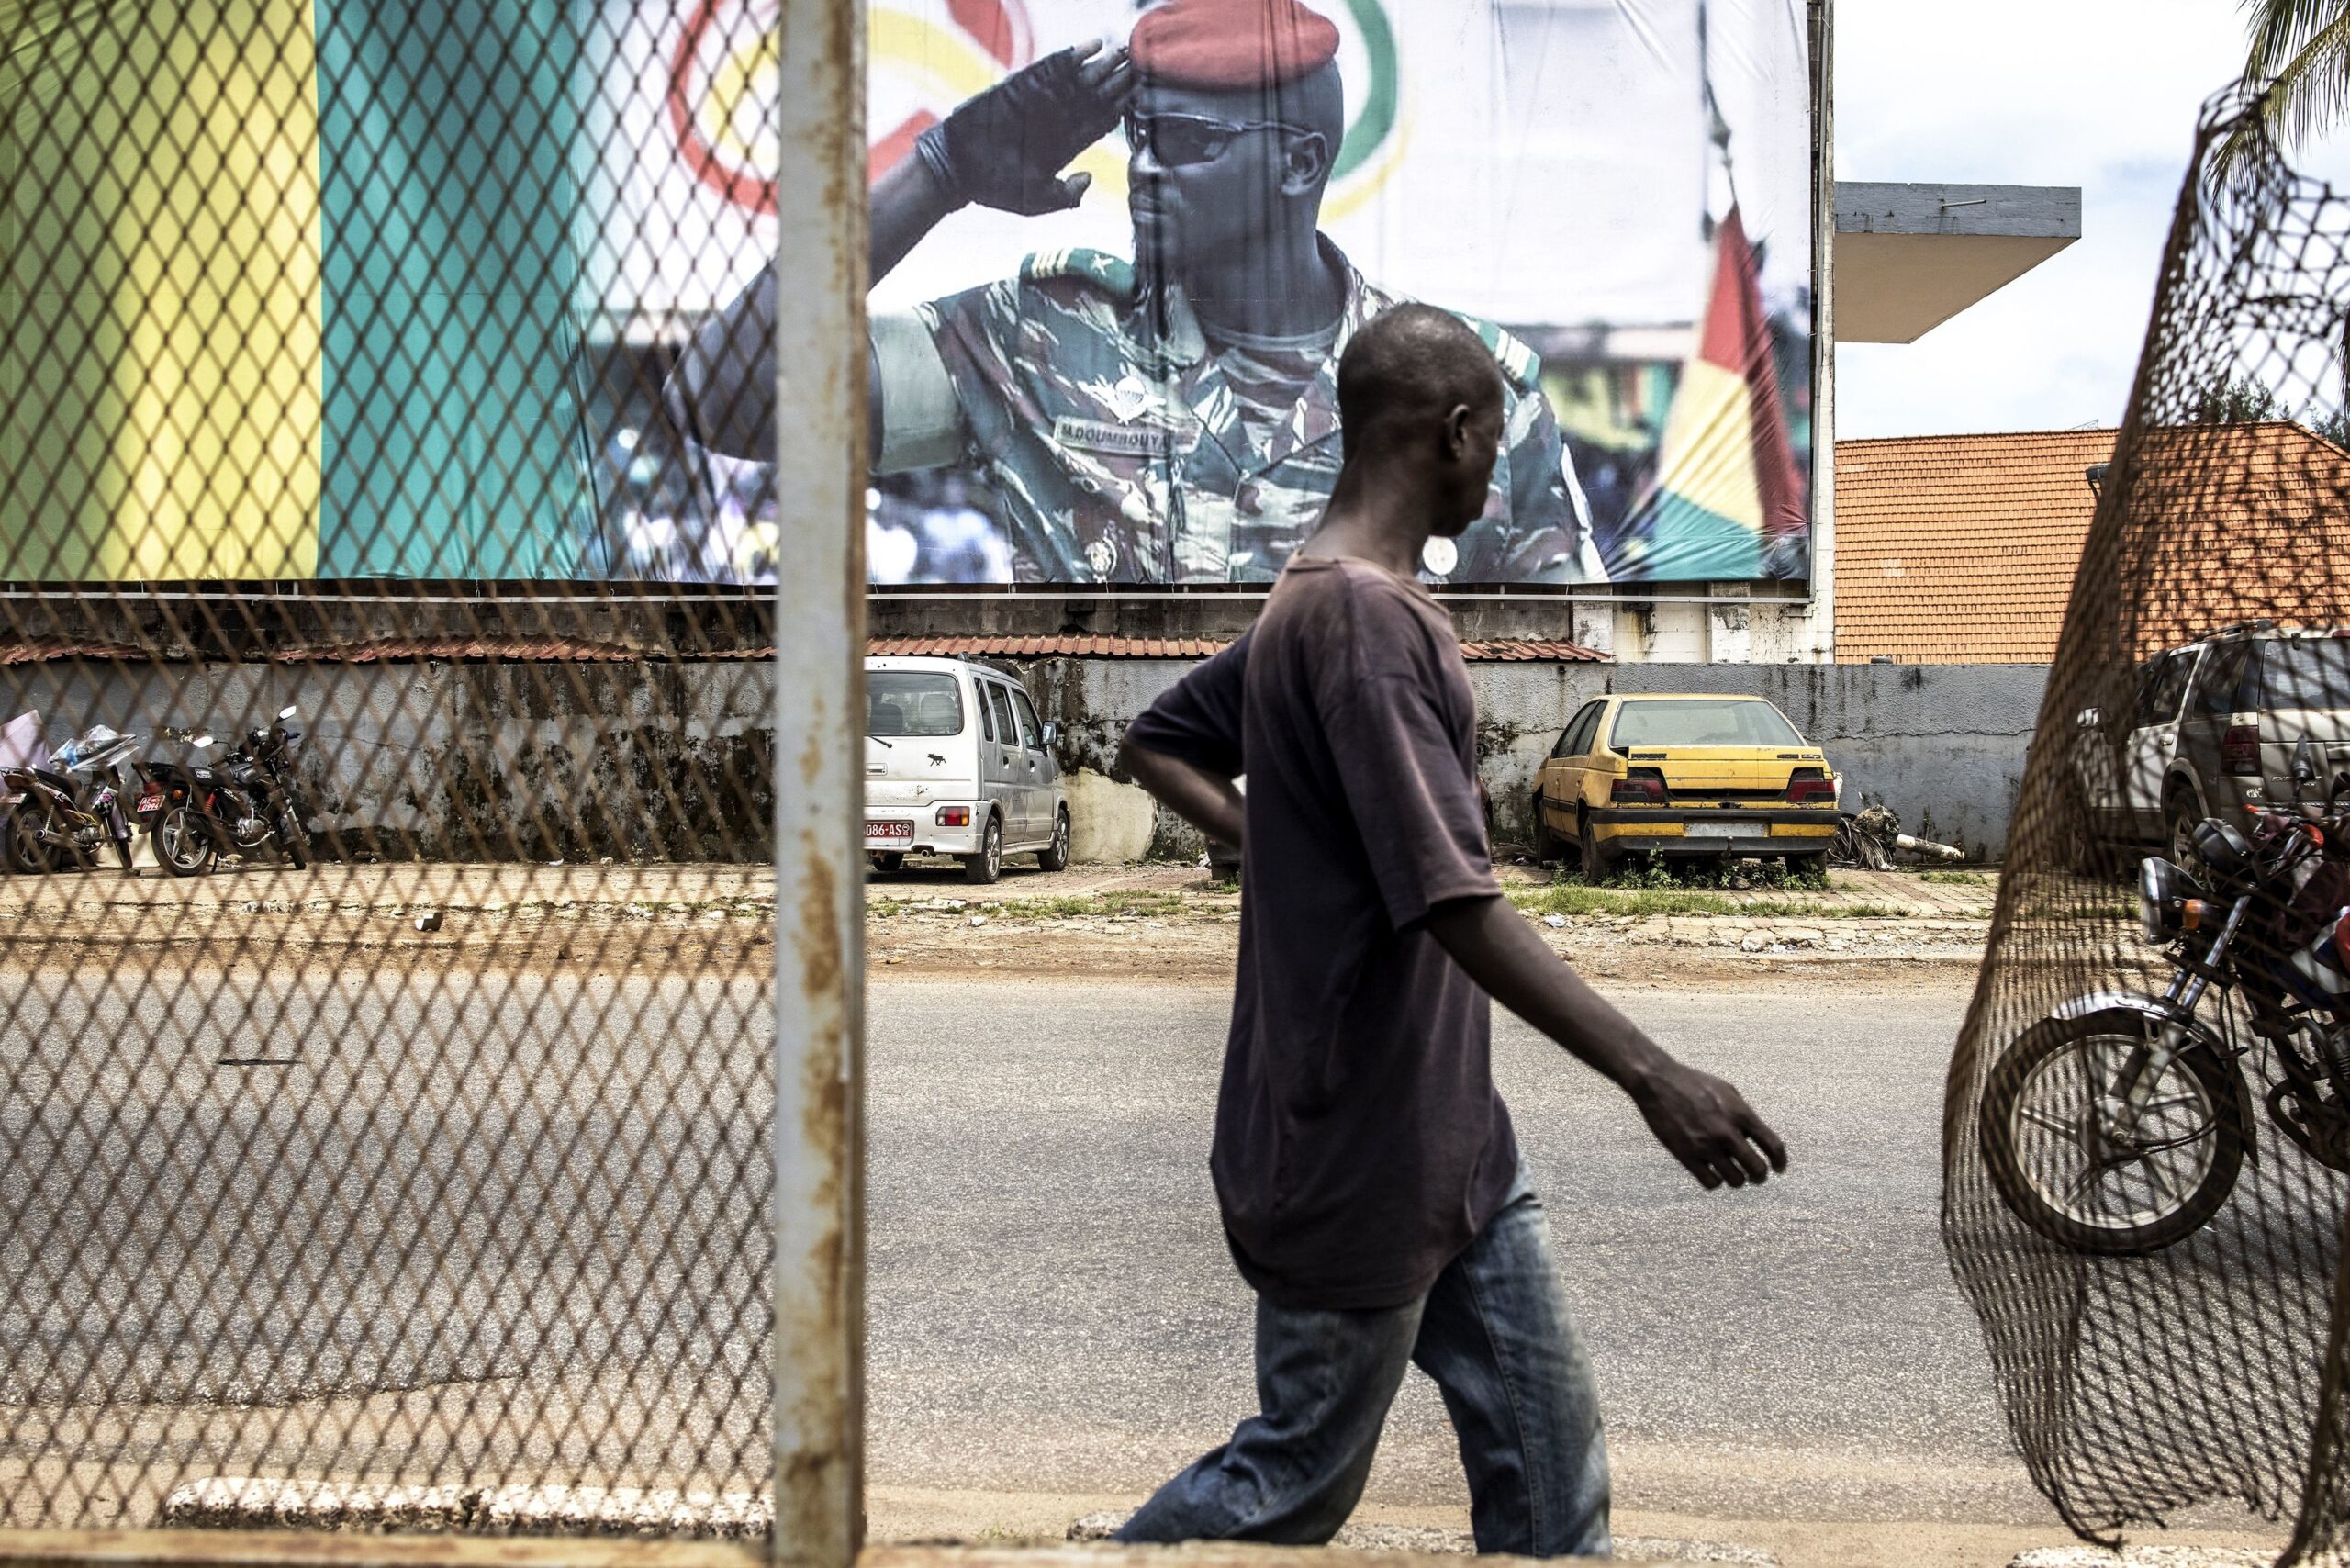 A man walks past a billboard showing junta leader, Colonel Mamady Doumbouya, in Conakry on September 11, 2021. Doumbouya's special forces on September 5, 2021 seized Alpha Conde in a Coup, the West African state's 83-year-old president, a former champion of democracy accused of taking the path of authoritarianism.